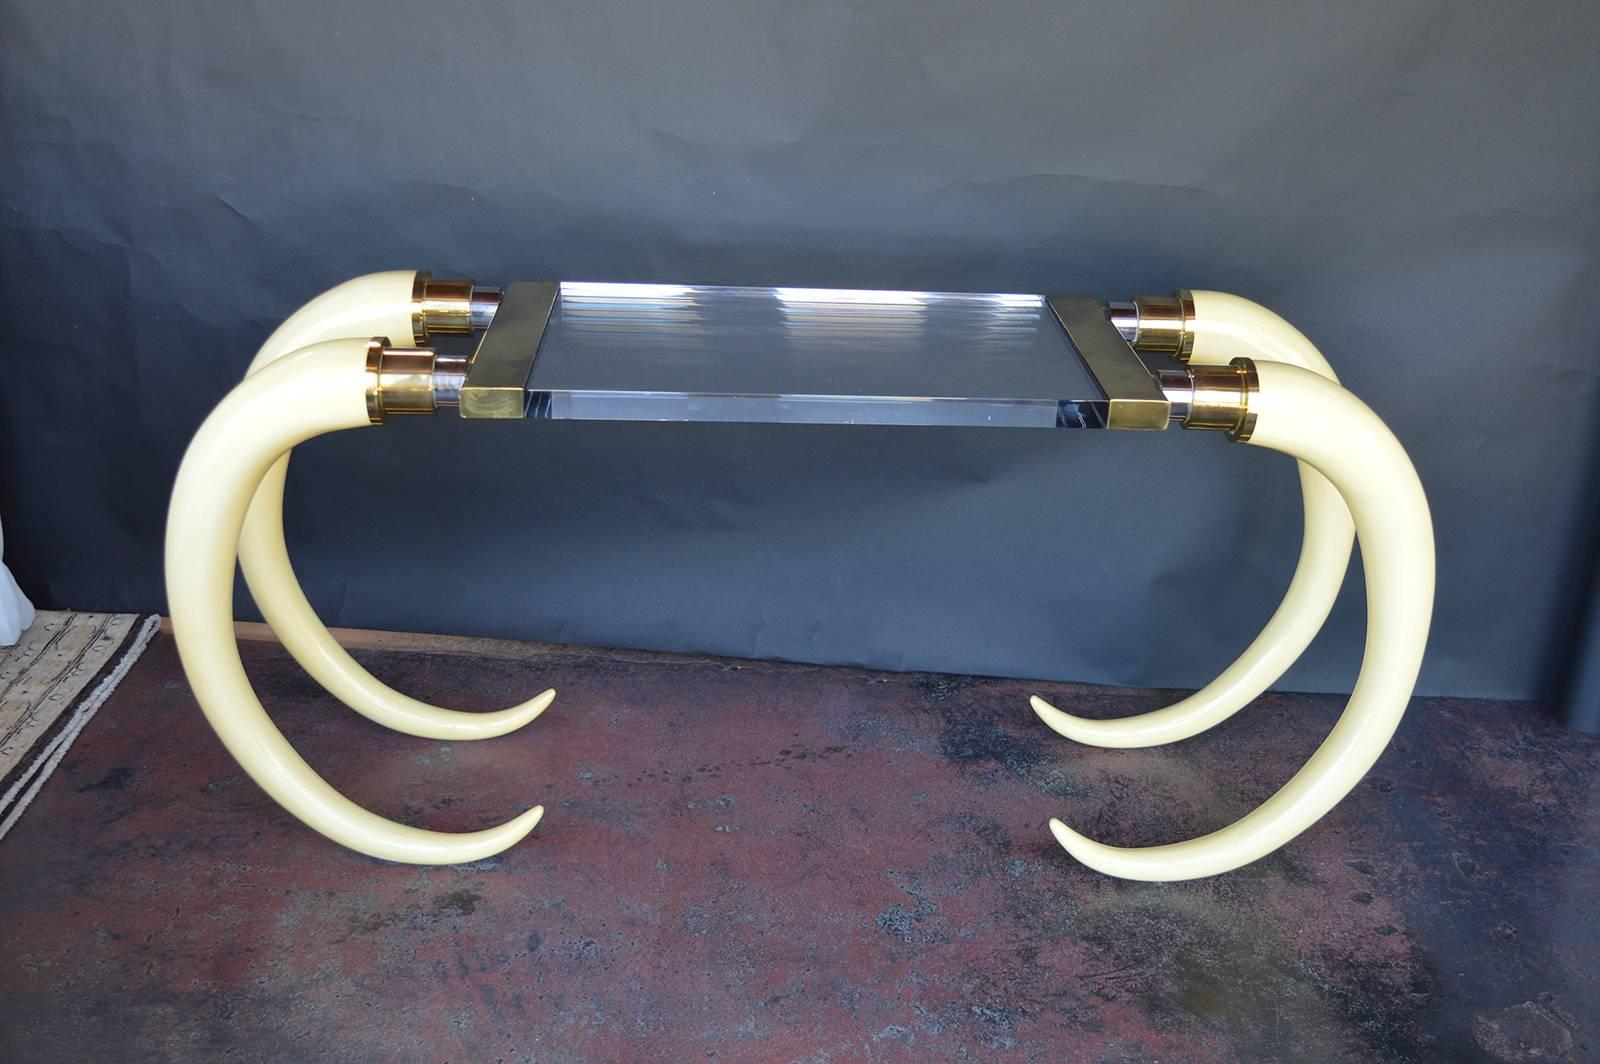 Lucite and faux tusk console with brass hardware. The Tusks are painted wood.